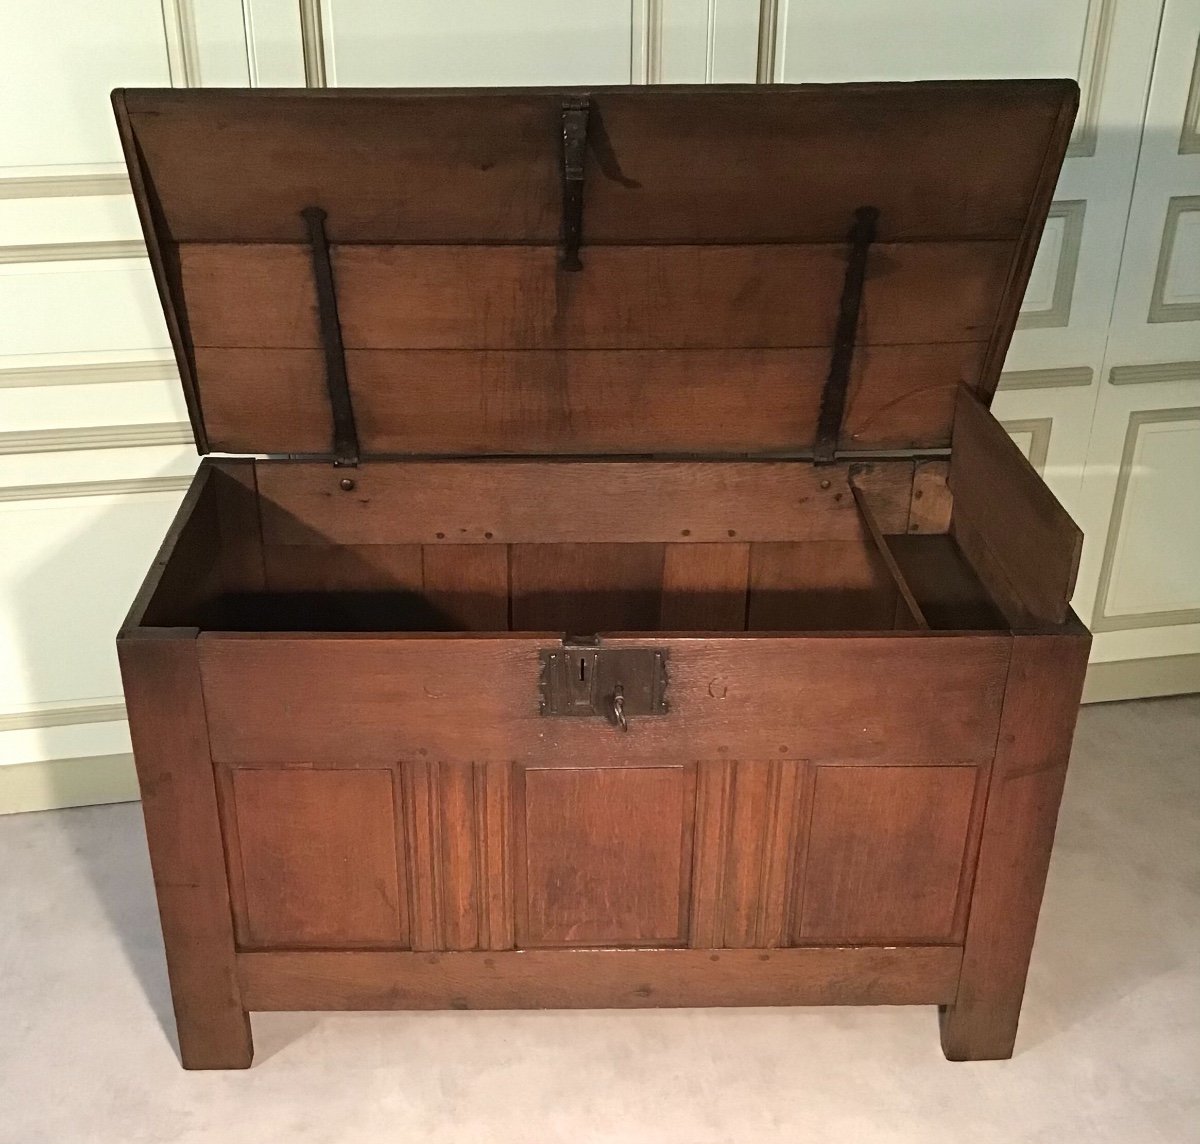 Anglo-norman Chest In Oak, Mid 18th Century Period.-photo-3